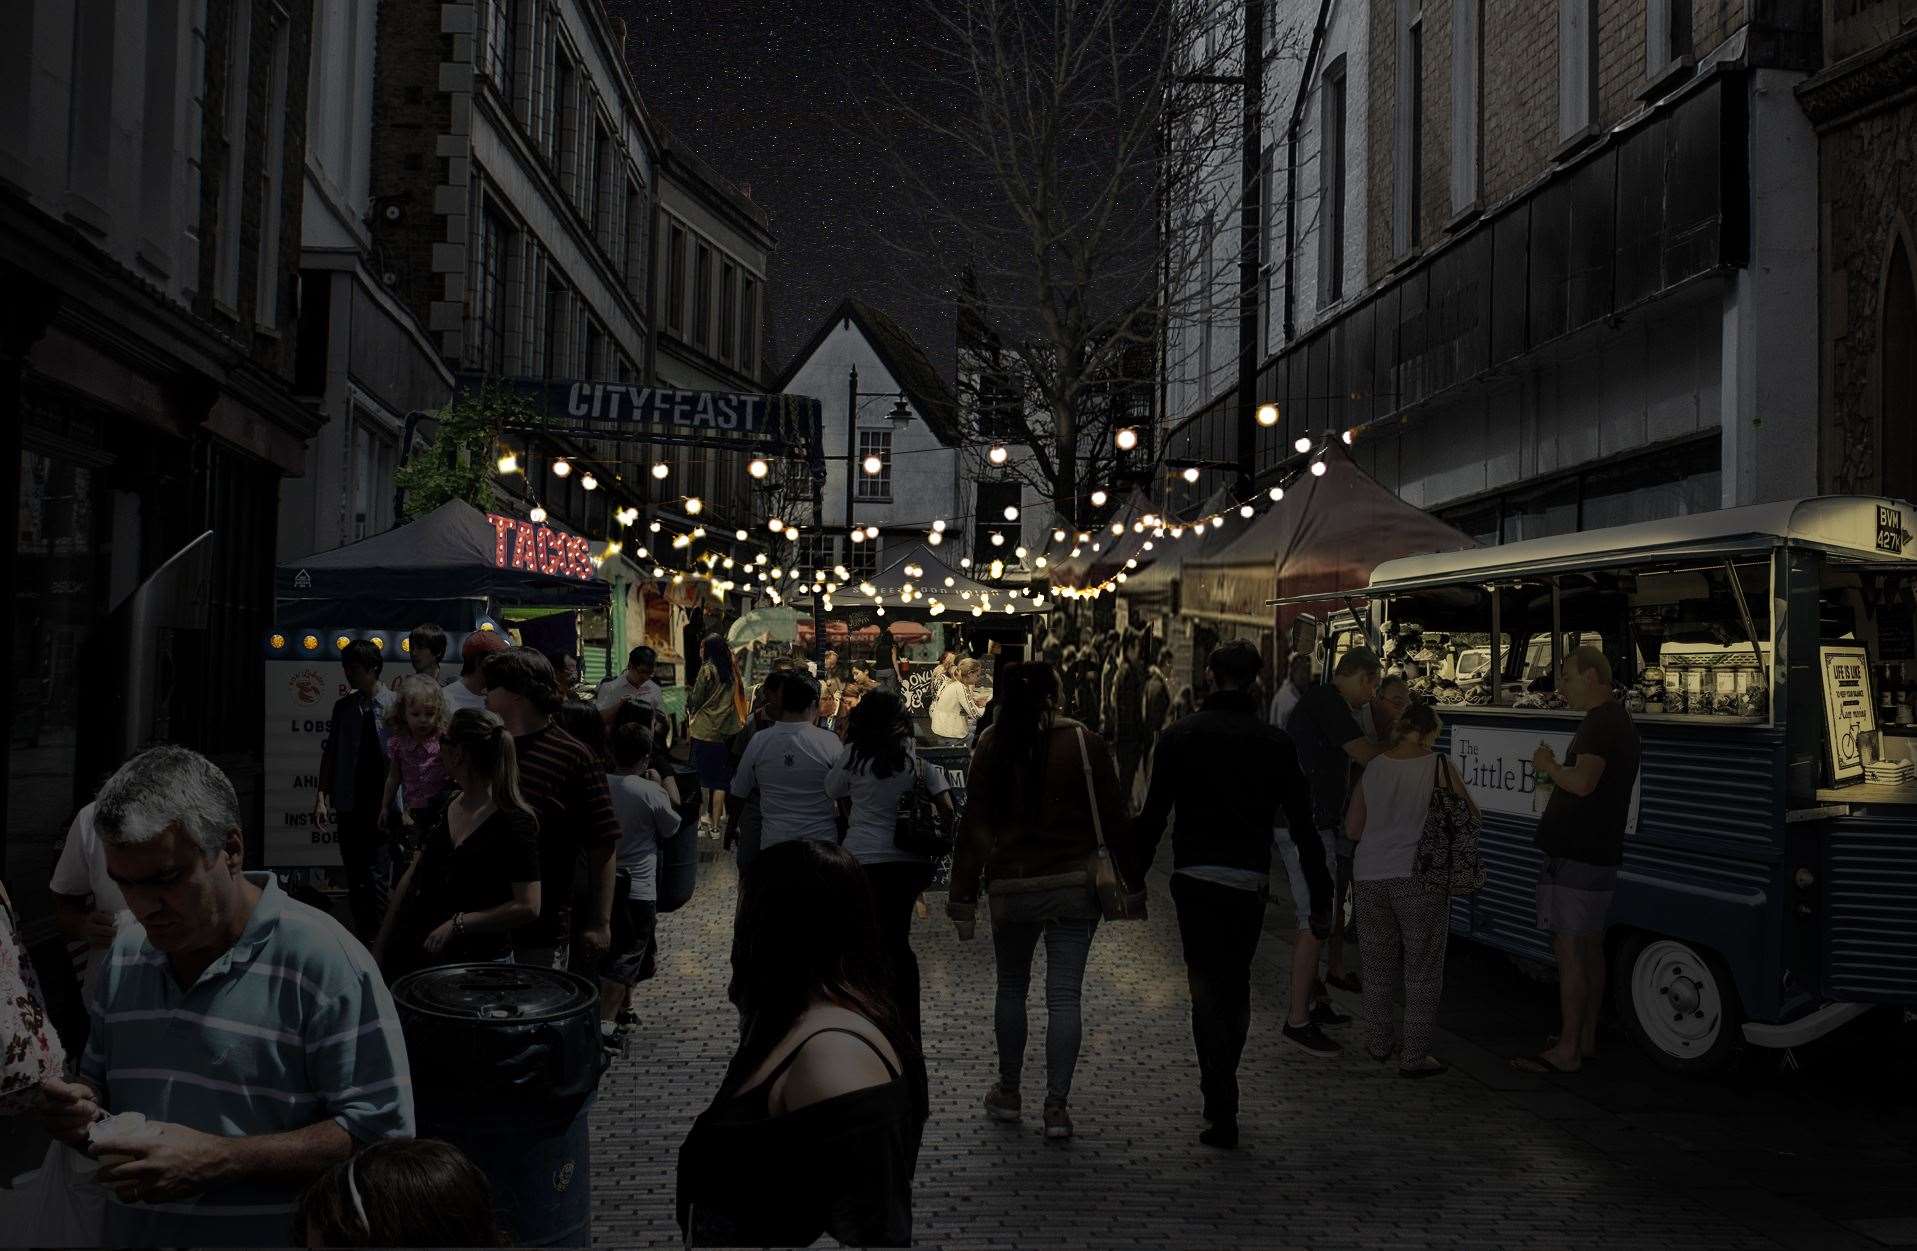 How City Feast could look by night. Picture: City Feast